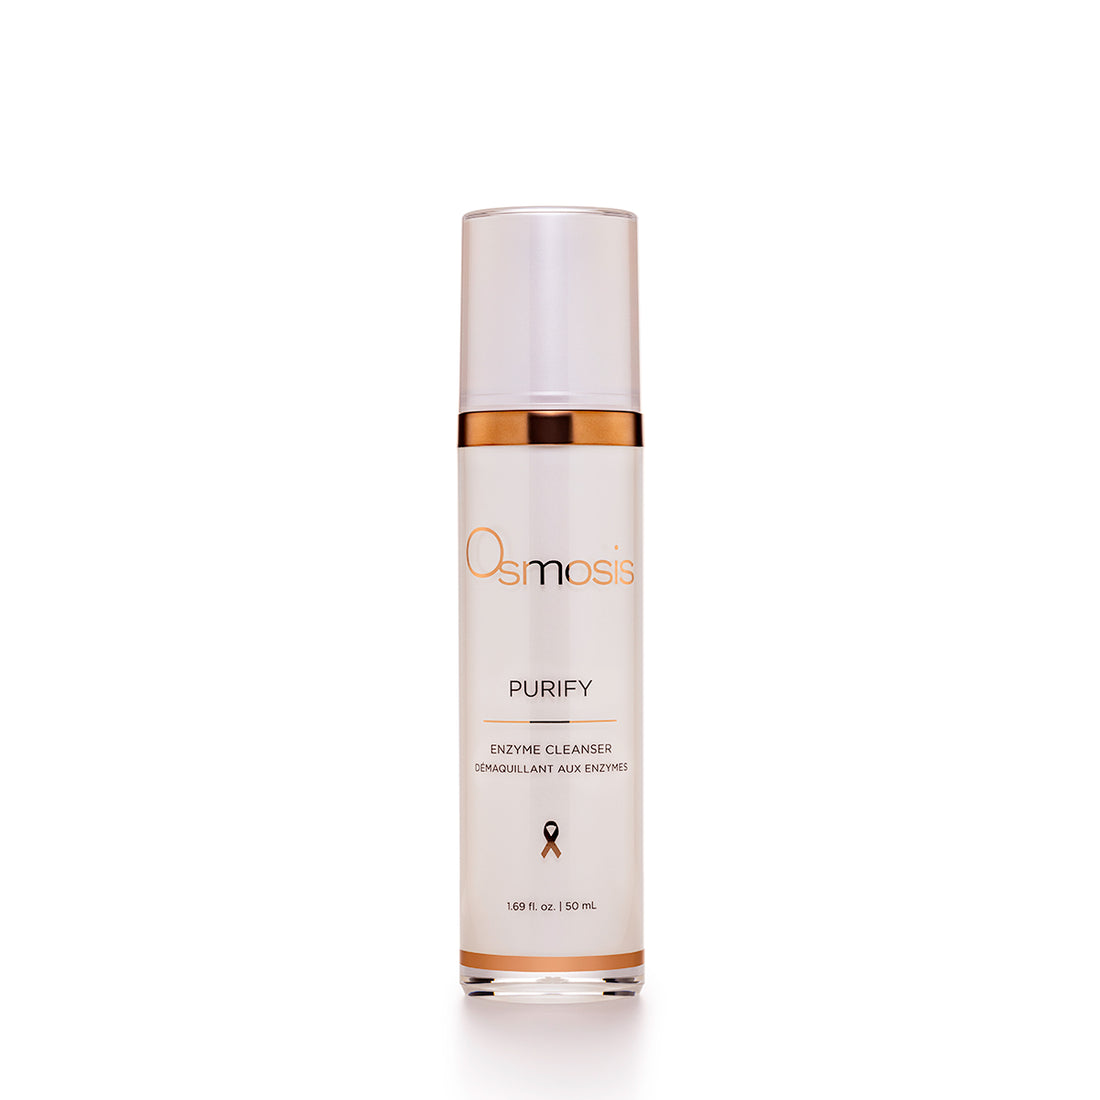 Osmosis Purify Enzyme Cleanser uses pineapple enzymes to gentle exfoliate while cleansing the skin. 